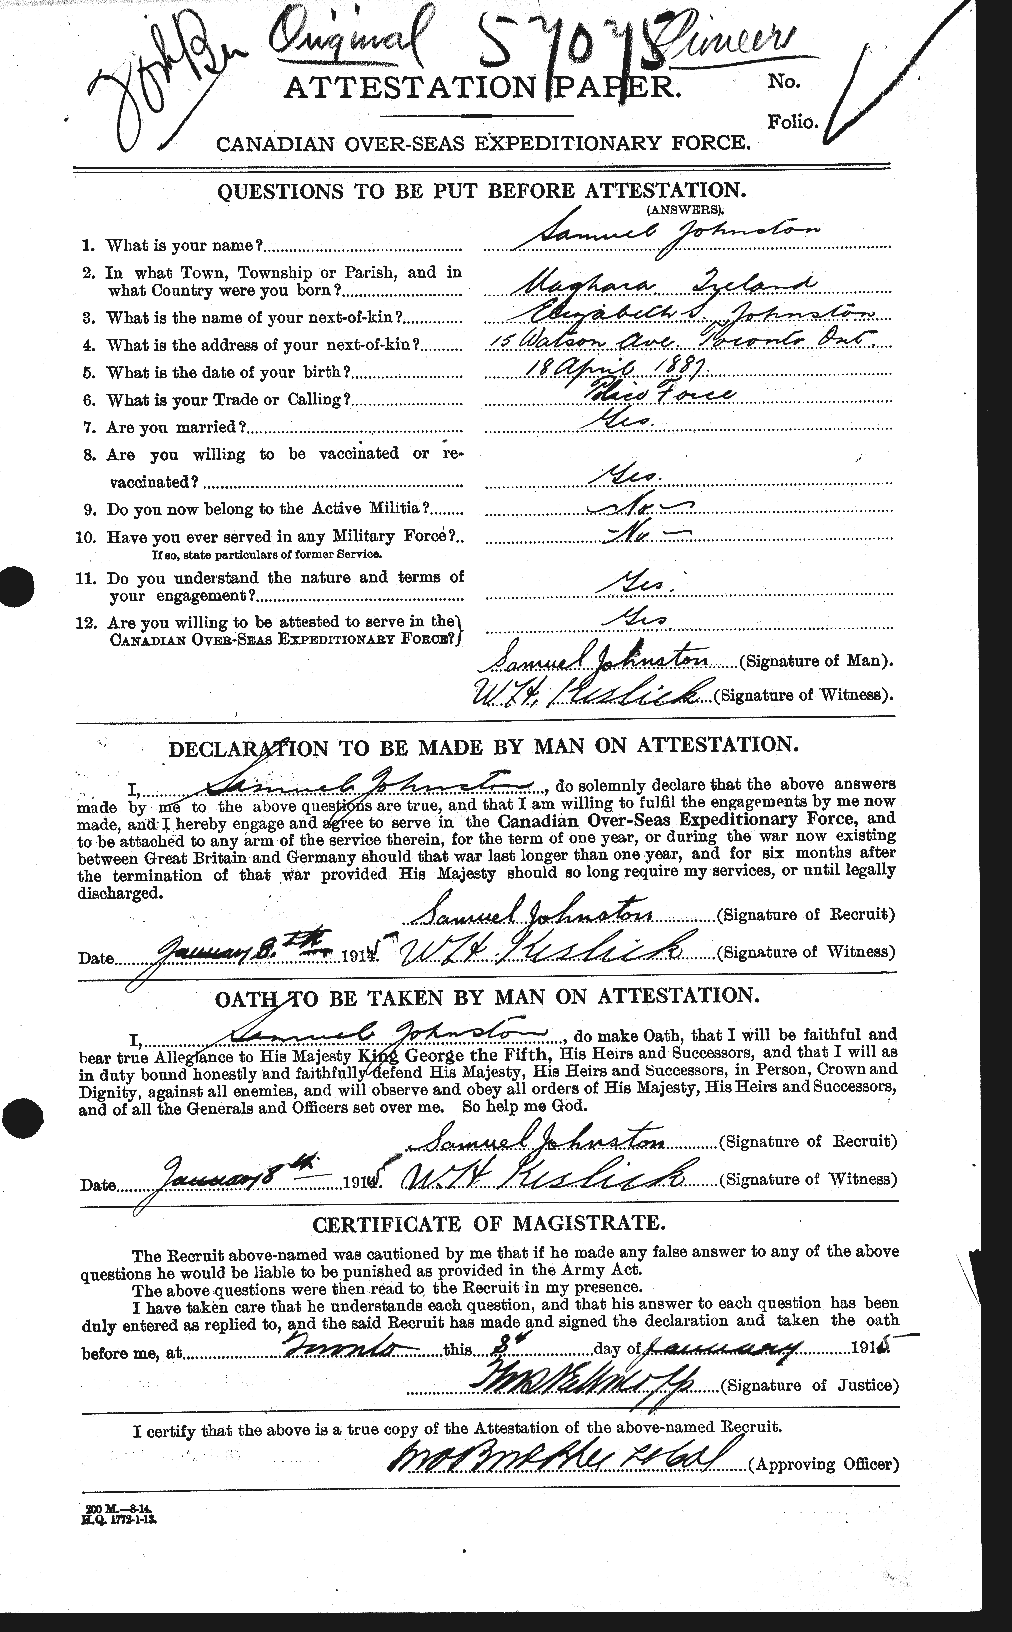 Personnel Records of the First World War - CEF 427082a